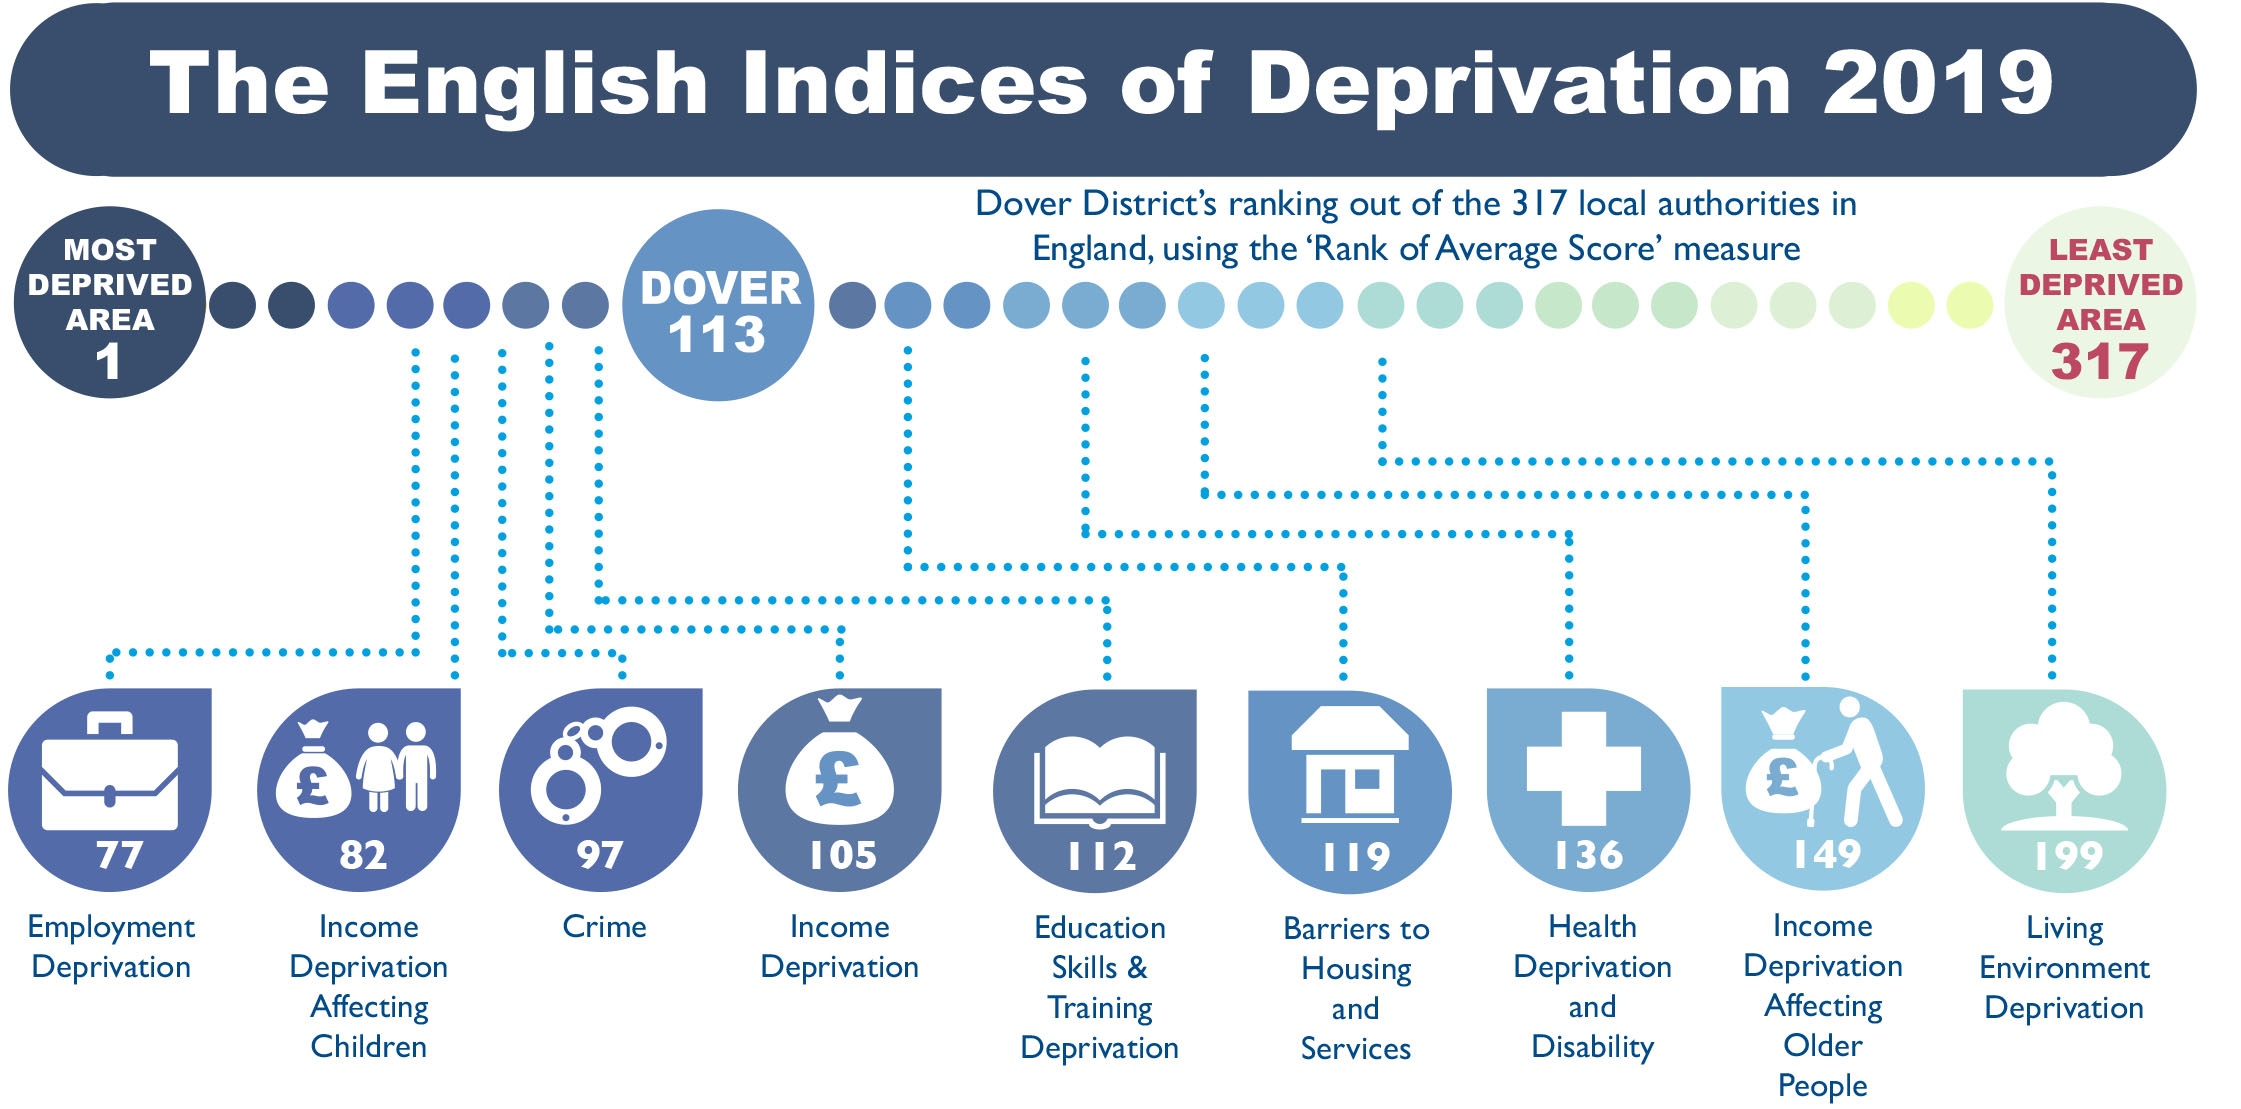 Infographic showing the Dover District’s national rankings out of the 317 local authority districts using the ‘Rank of Average Score’ measure, across all the deprivation domains. Full text below the image..